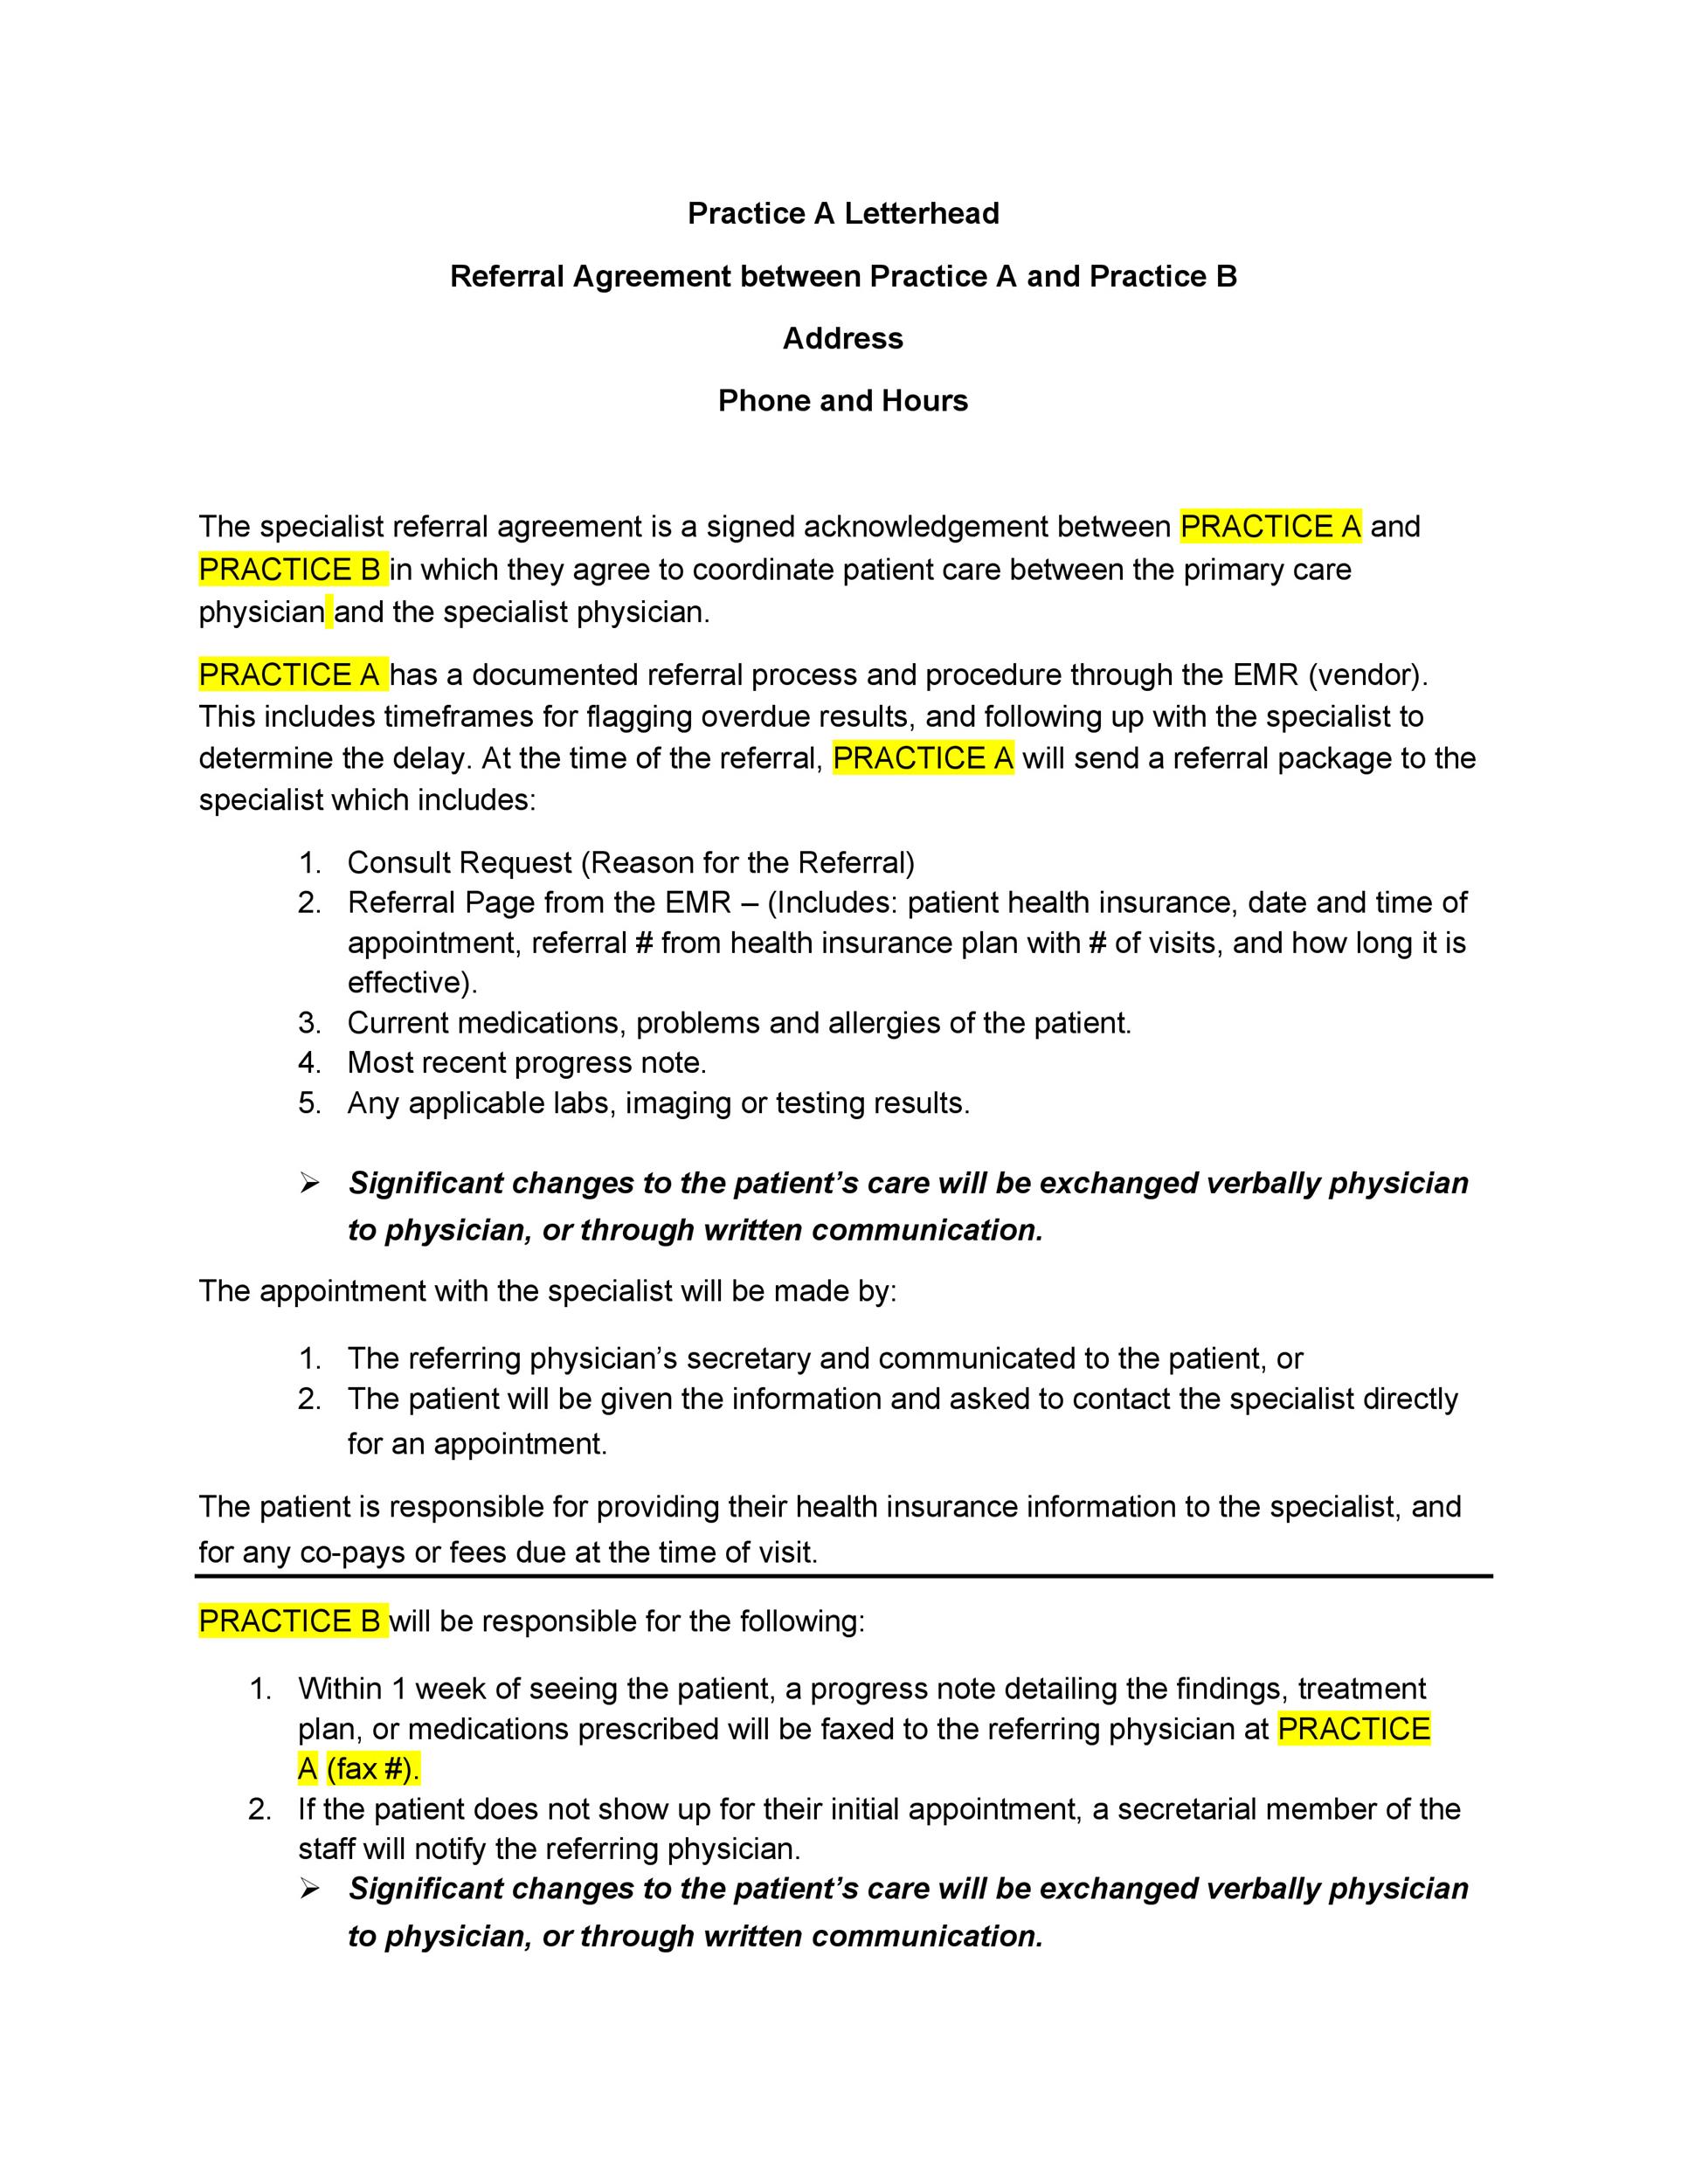 Free referral agreement template 02